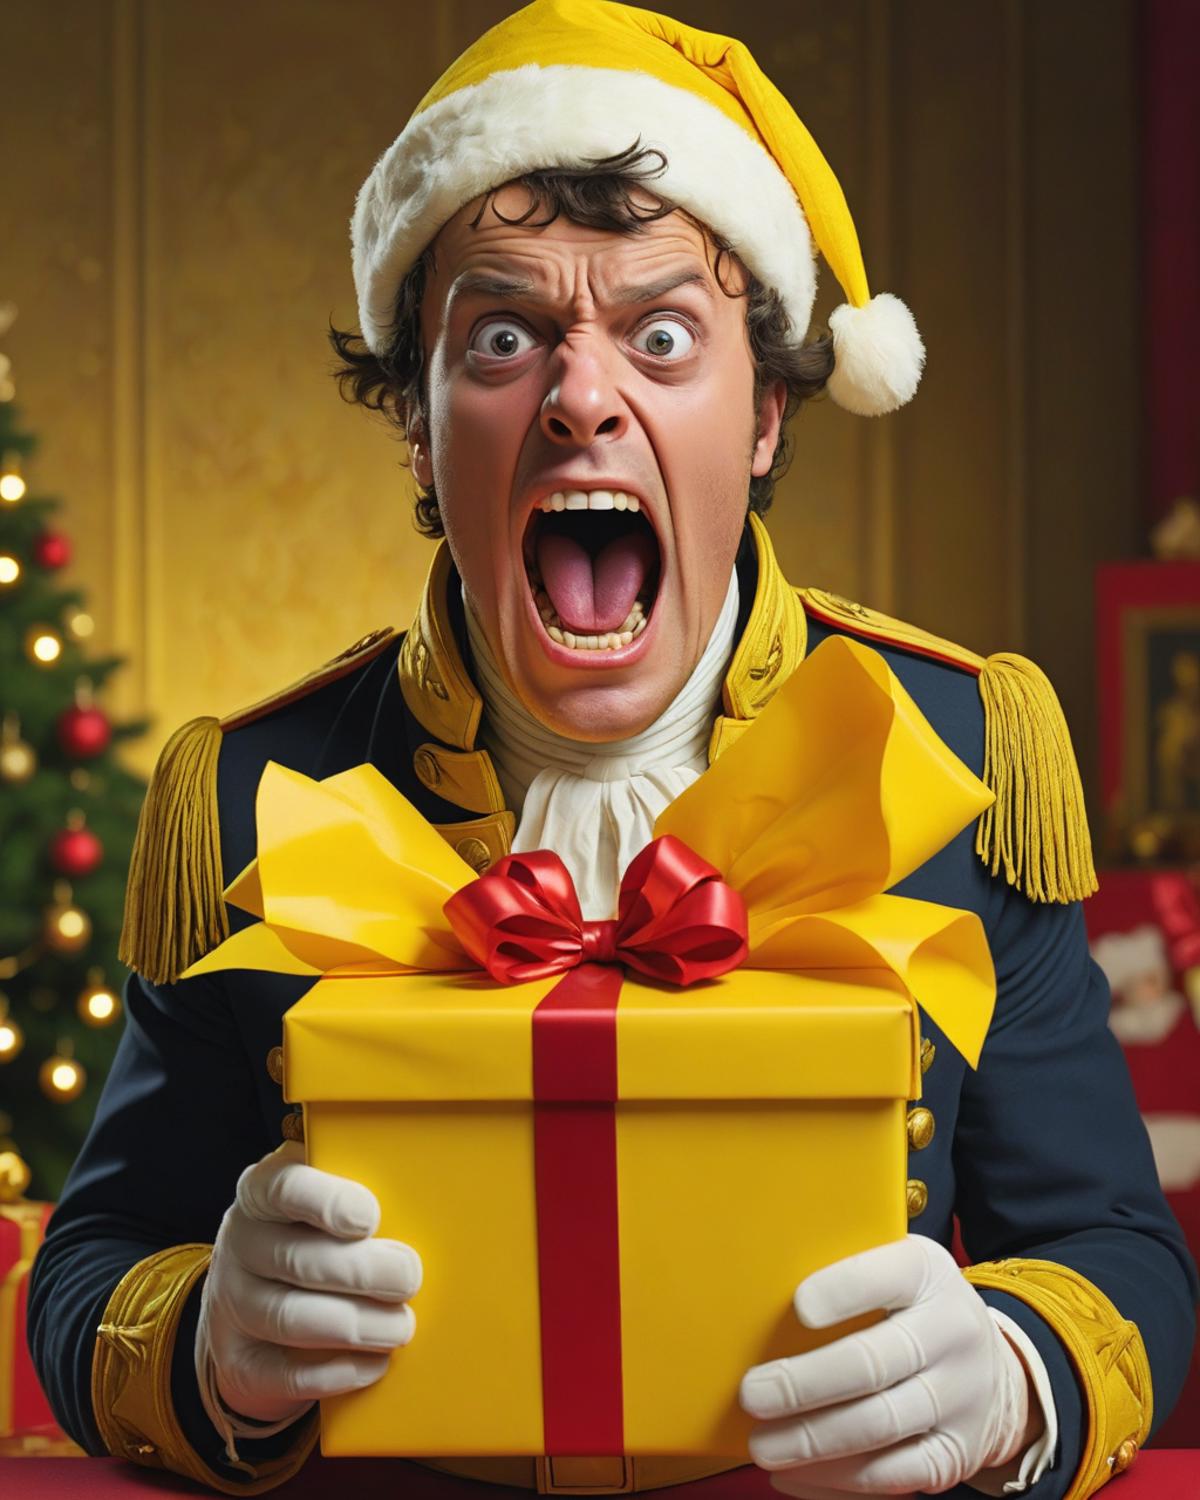 A man in a costume with a yellow bow tie holding a yellow gift box with a red bow.